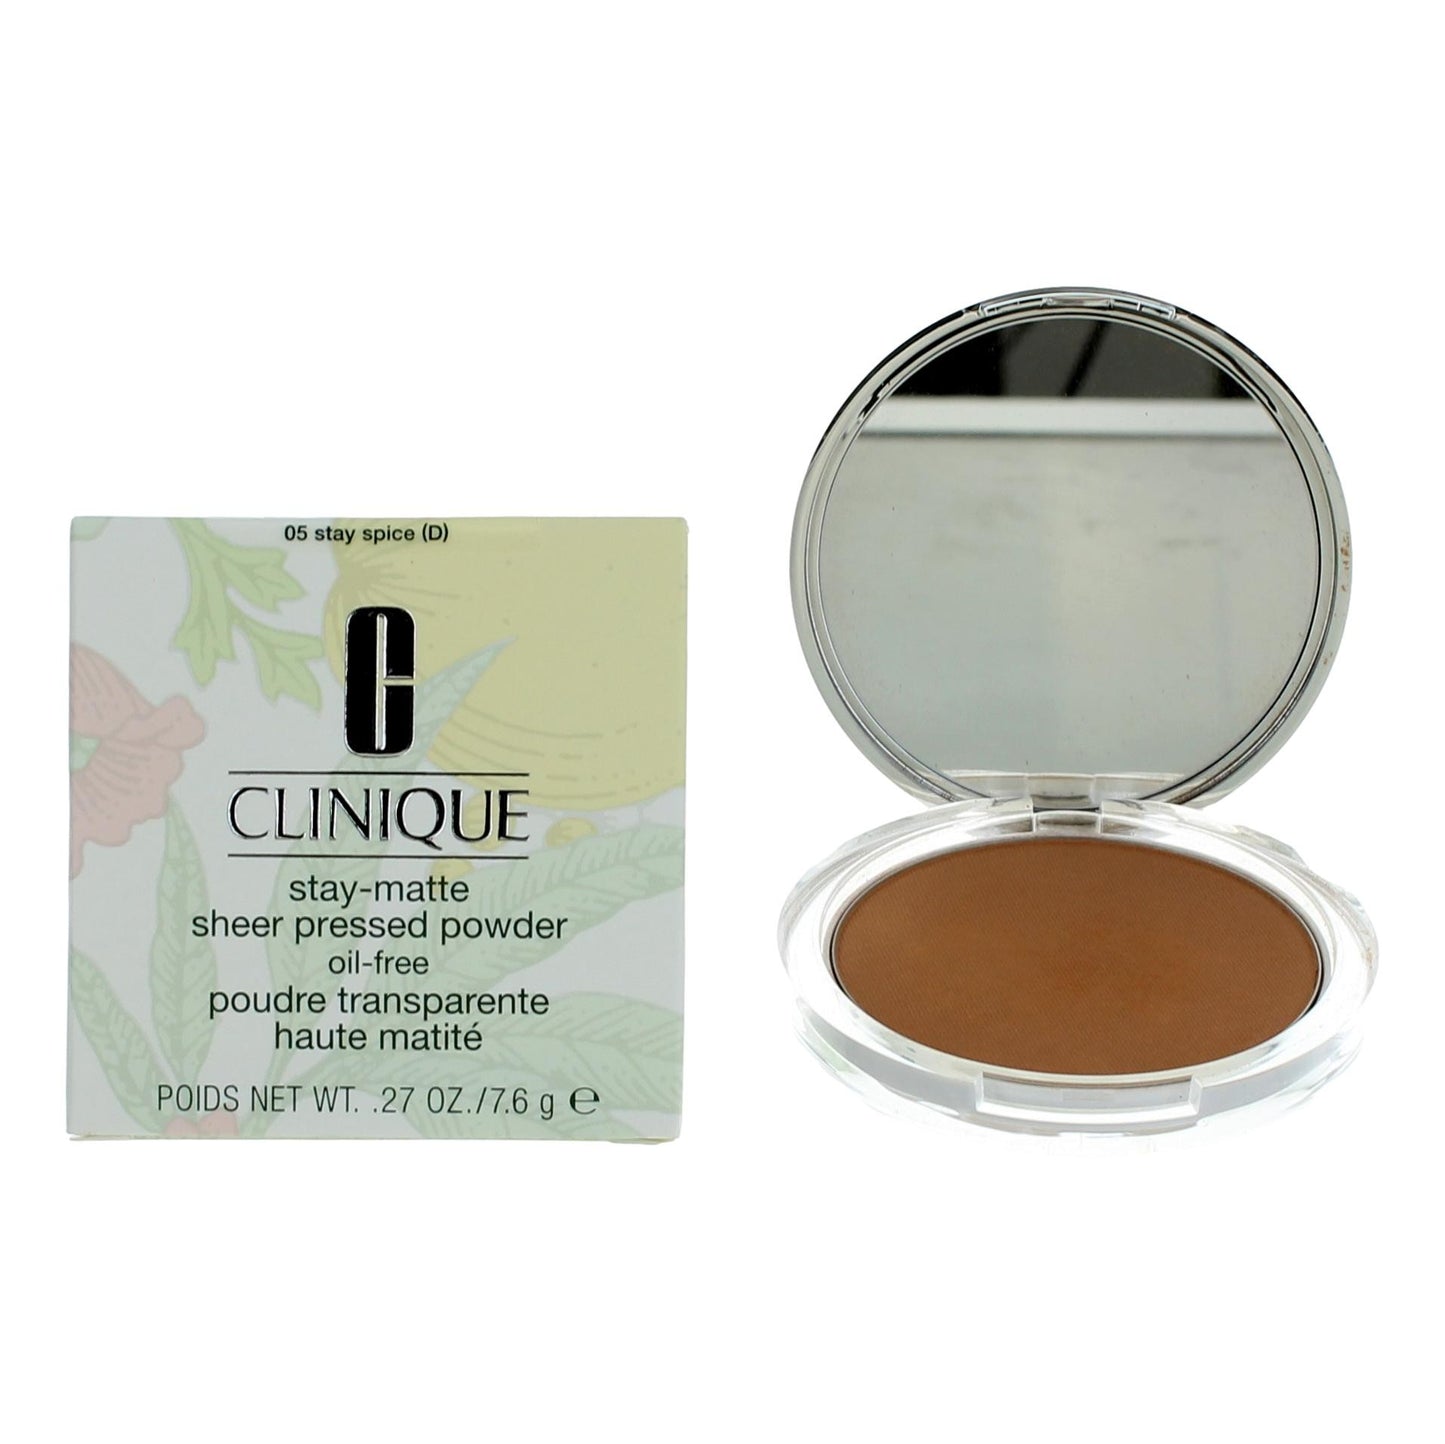 Clinique Stay-Matte by Clinique, .27oz Sheer Pressed Powder - 05 Stay Spice - 05 Stay Spice